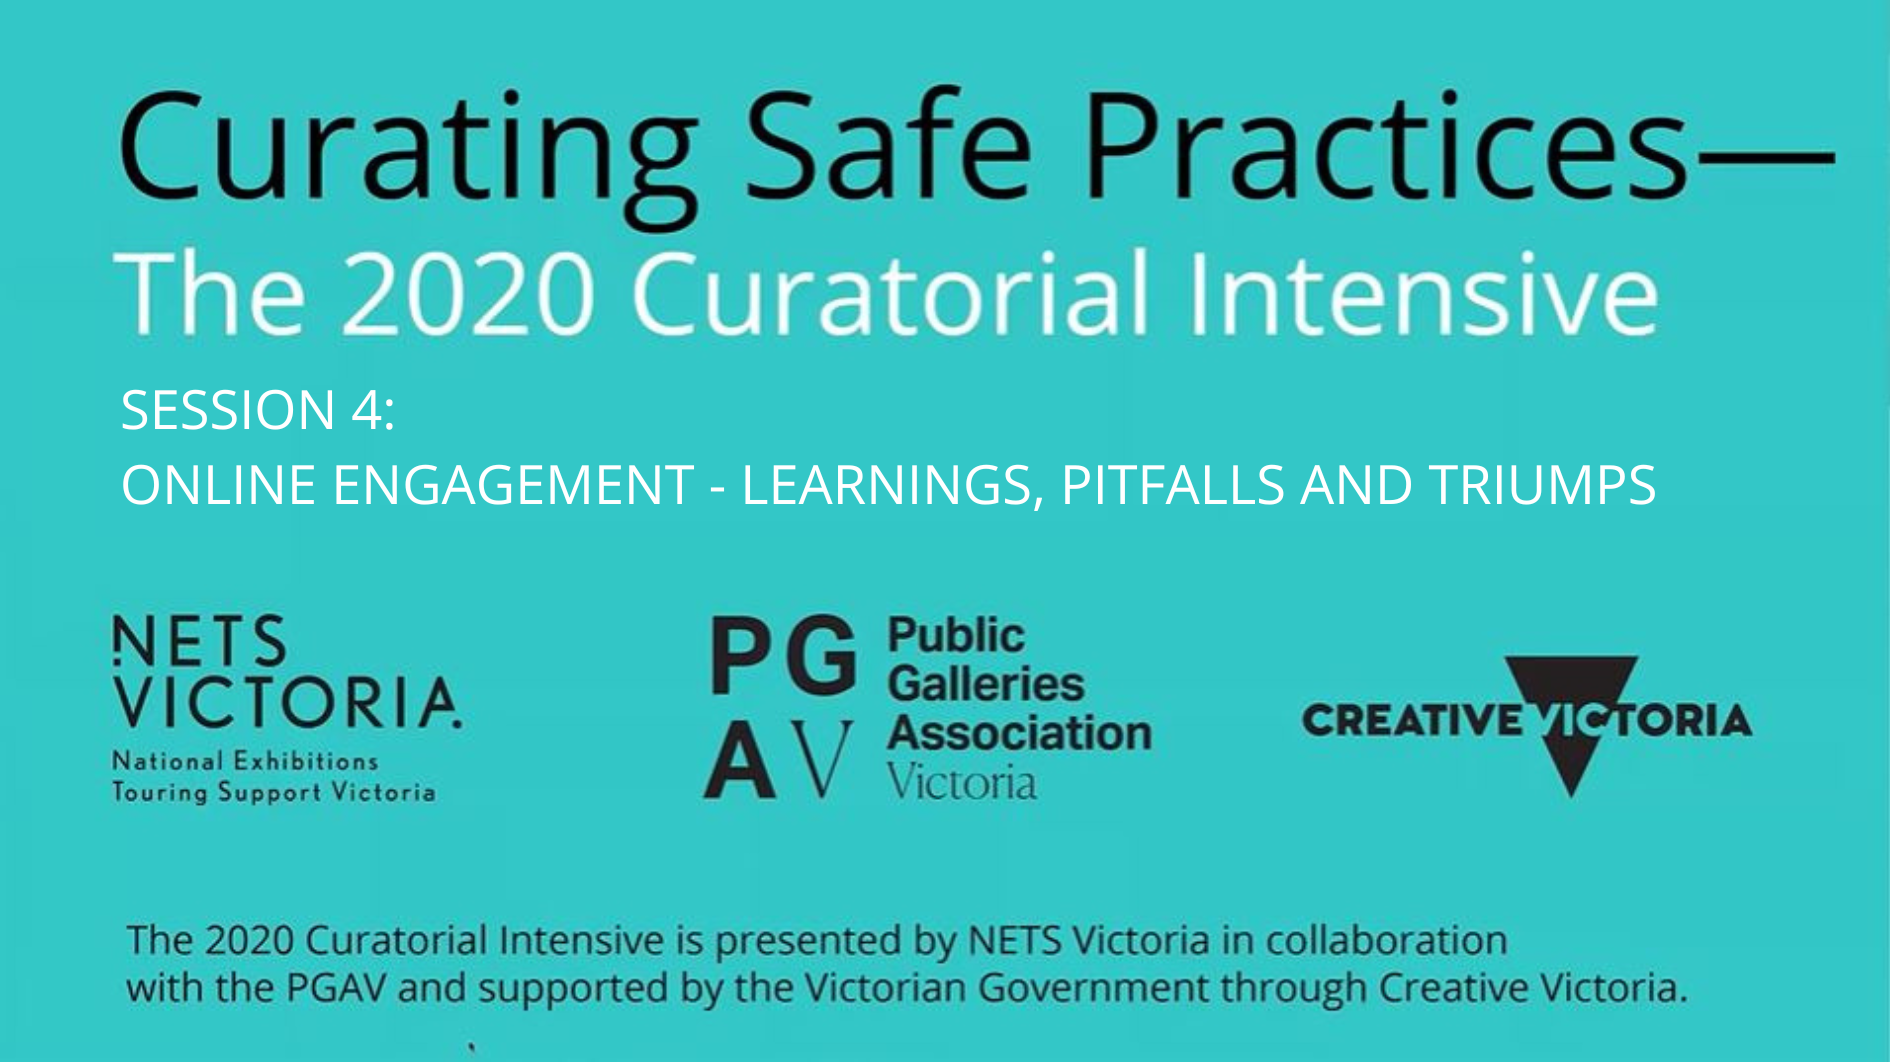 EVENT 2020 CURATORIAL INTENSIVE - SESSION 4